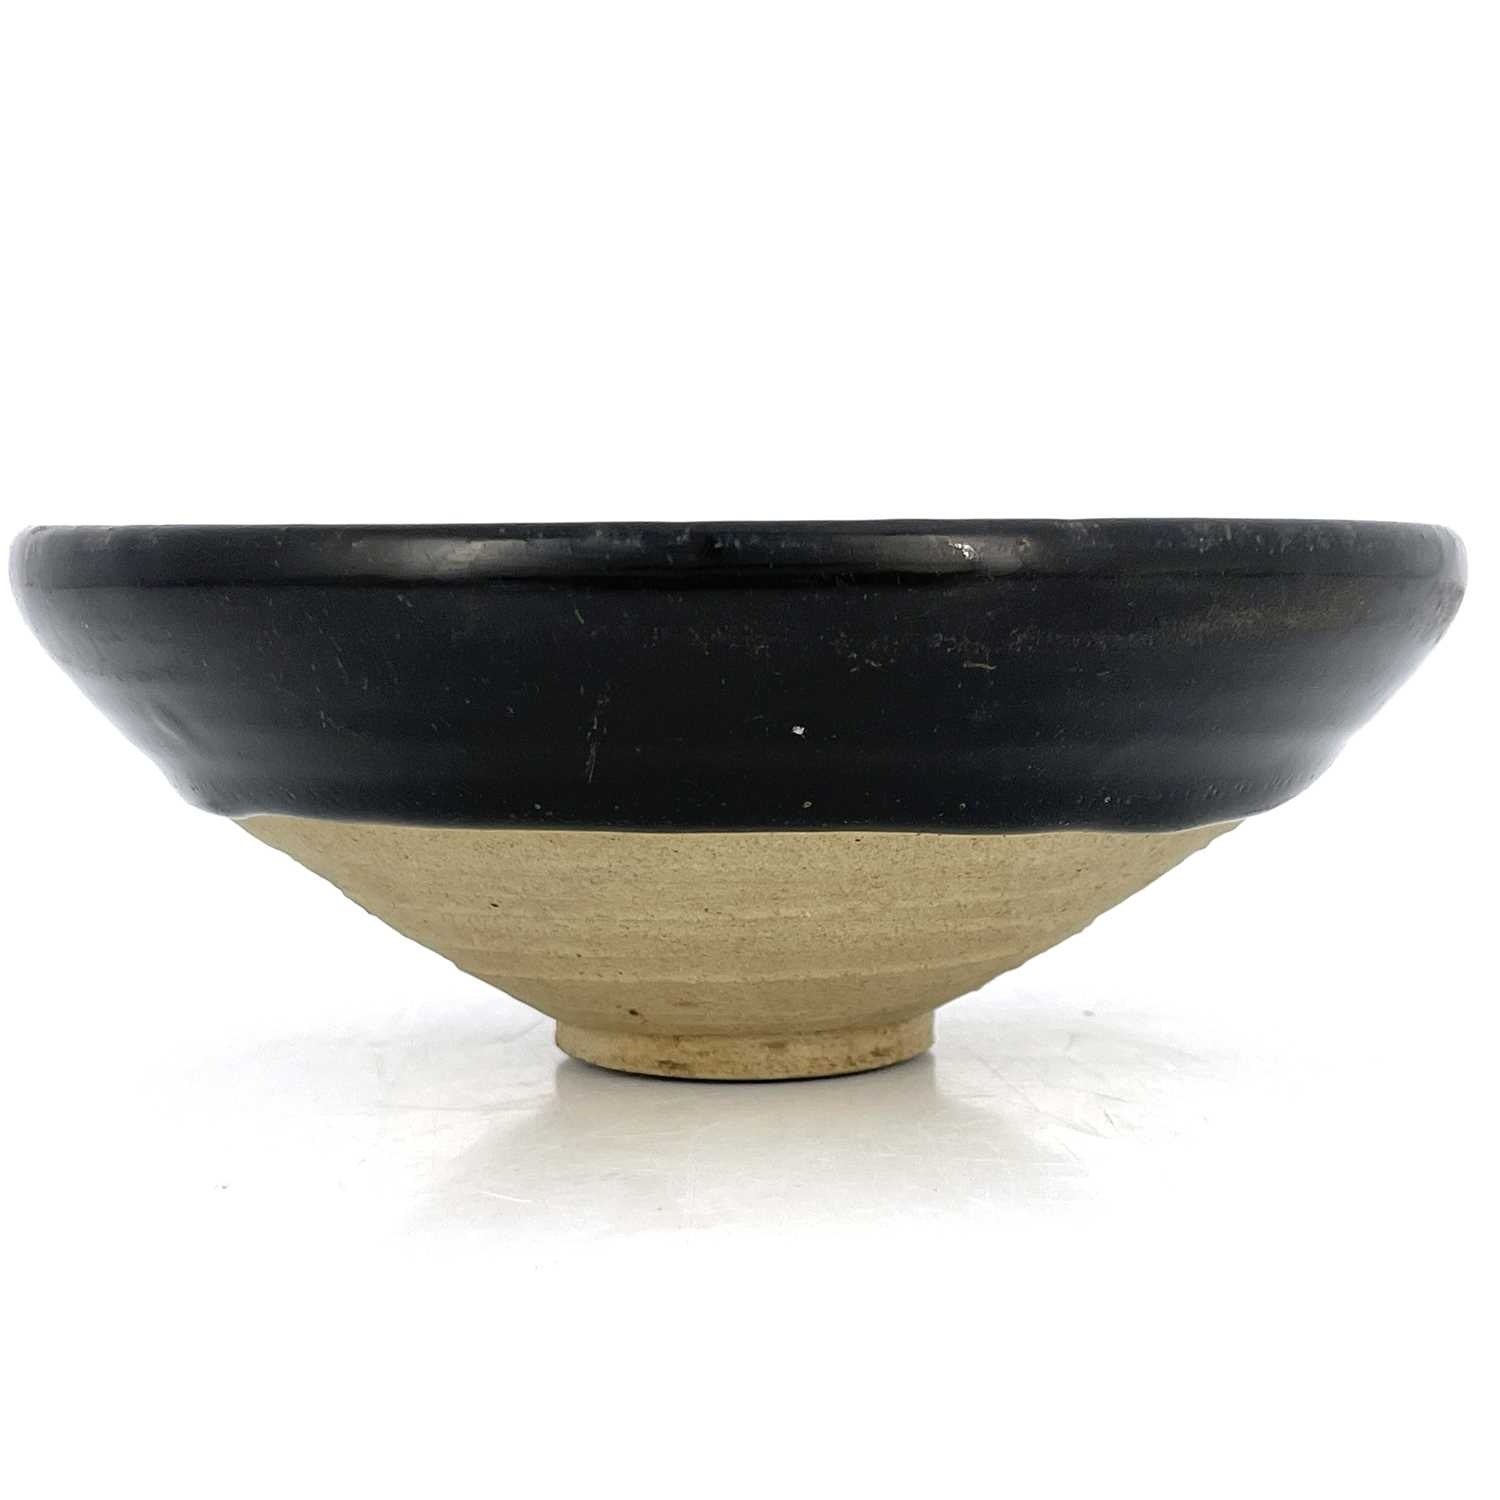 A Chinese Jian type black glazed bowl, probably Southern Song dynasty, conical with dipped glaze, - Image 3 of 4